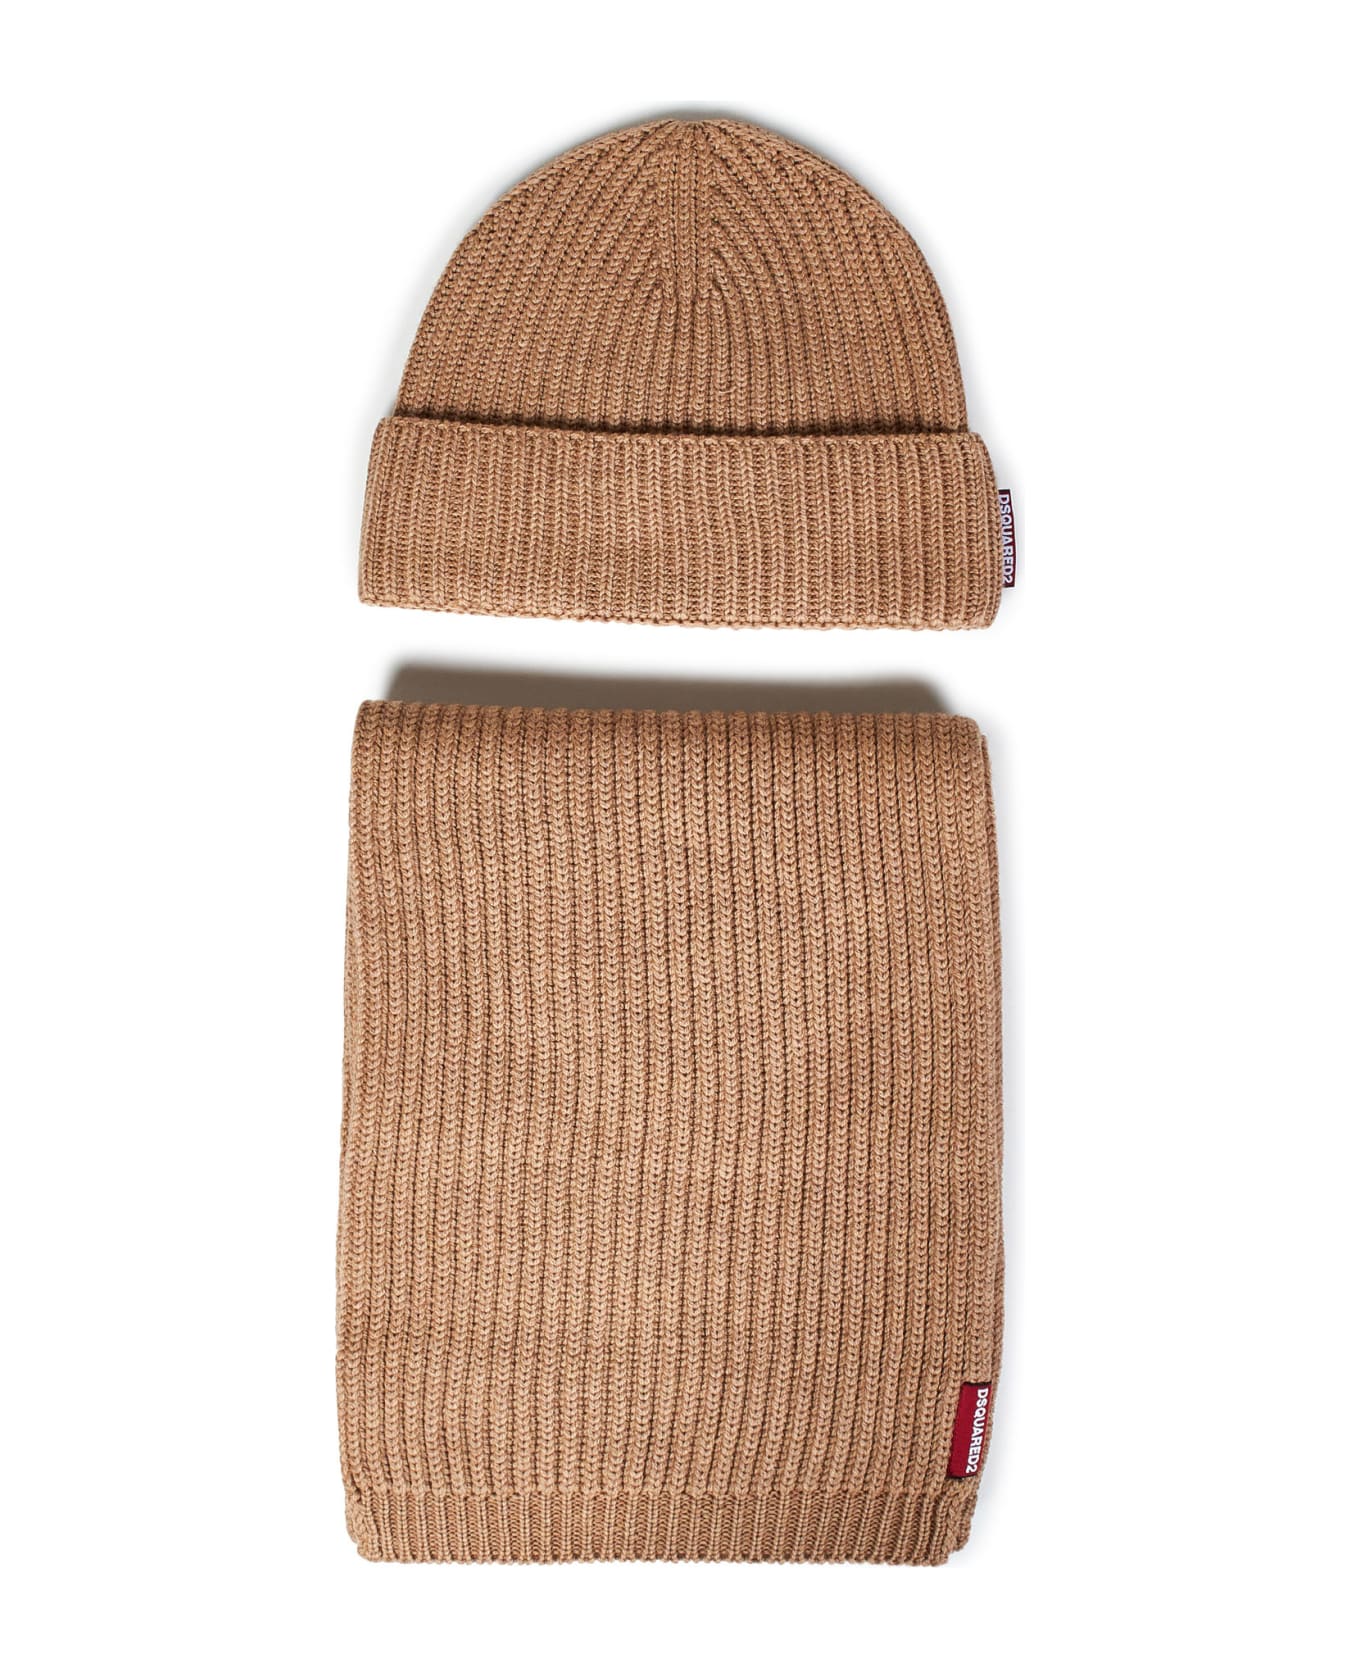 Dsquared2 Scarf And Wool Hat Set - Beige 帽子